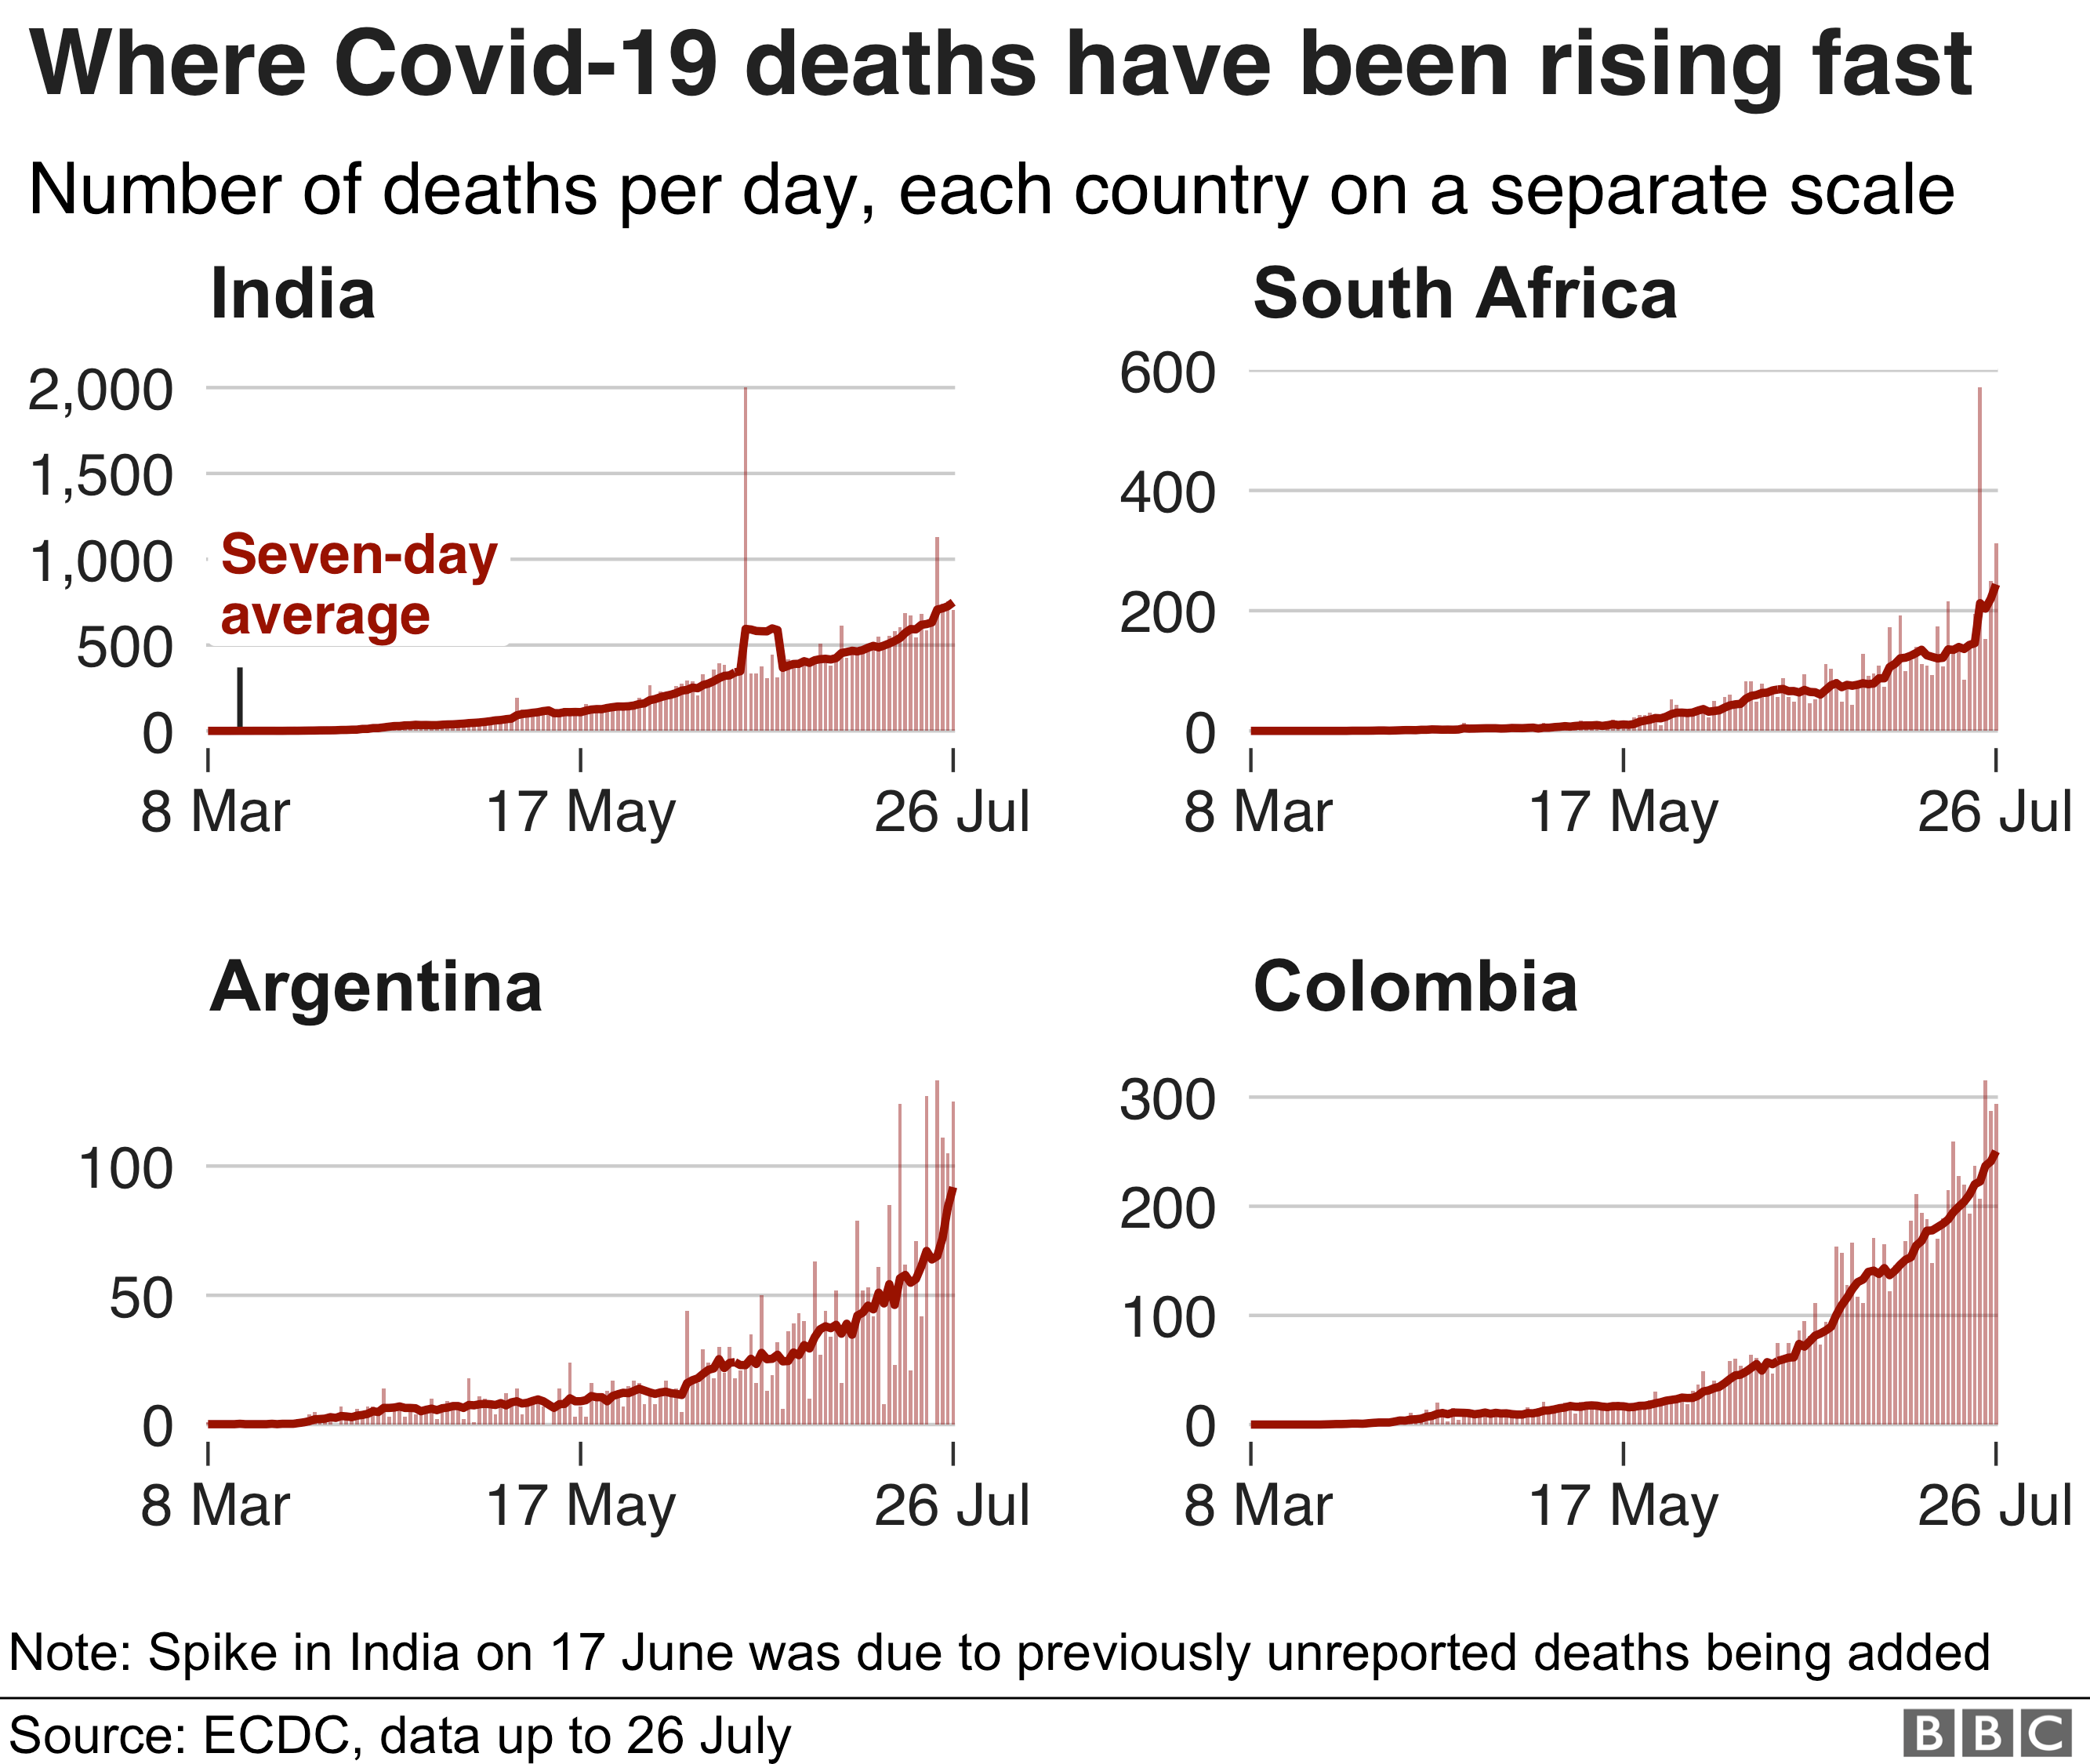 Chart shows deaths have been rising fastest in selected countries like India, South Africa, Argentina and Colombia